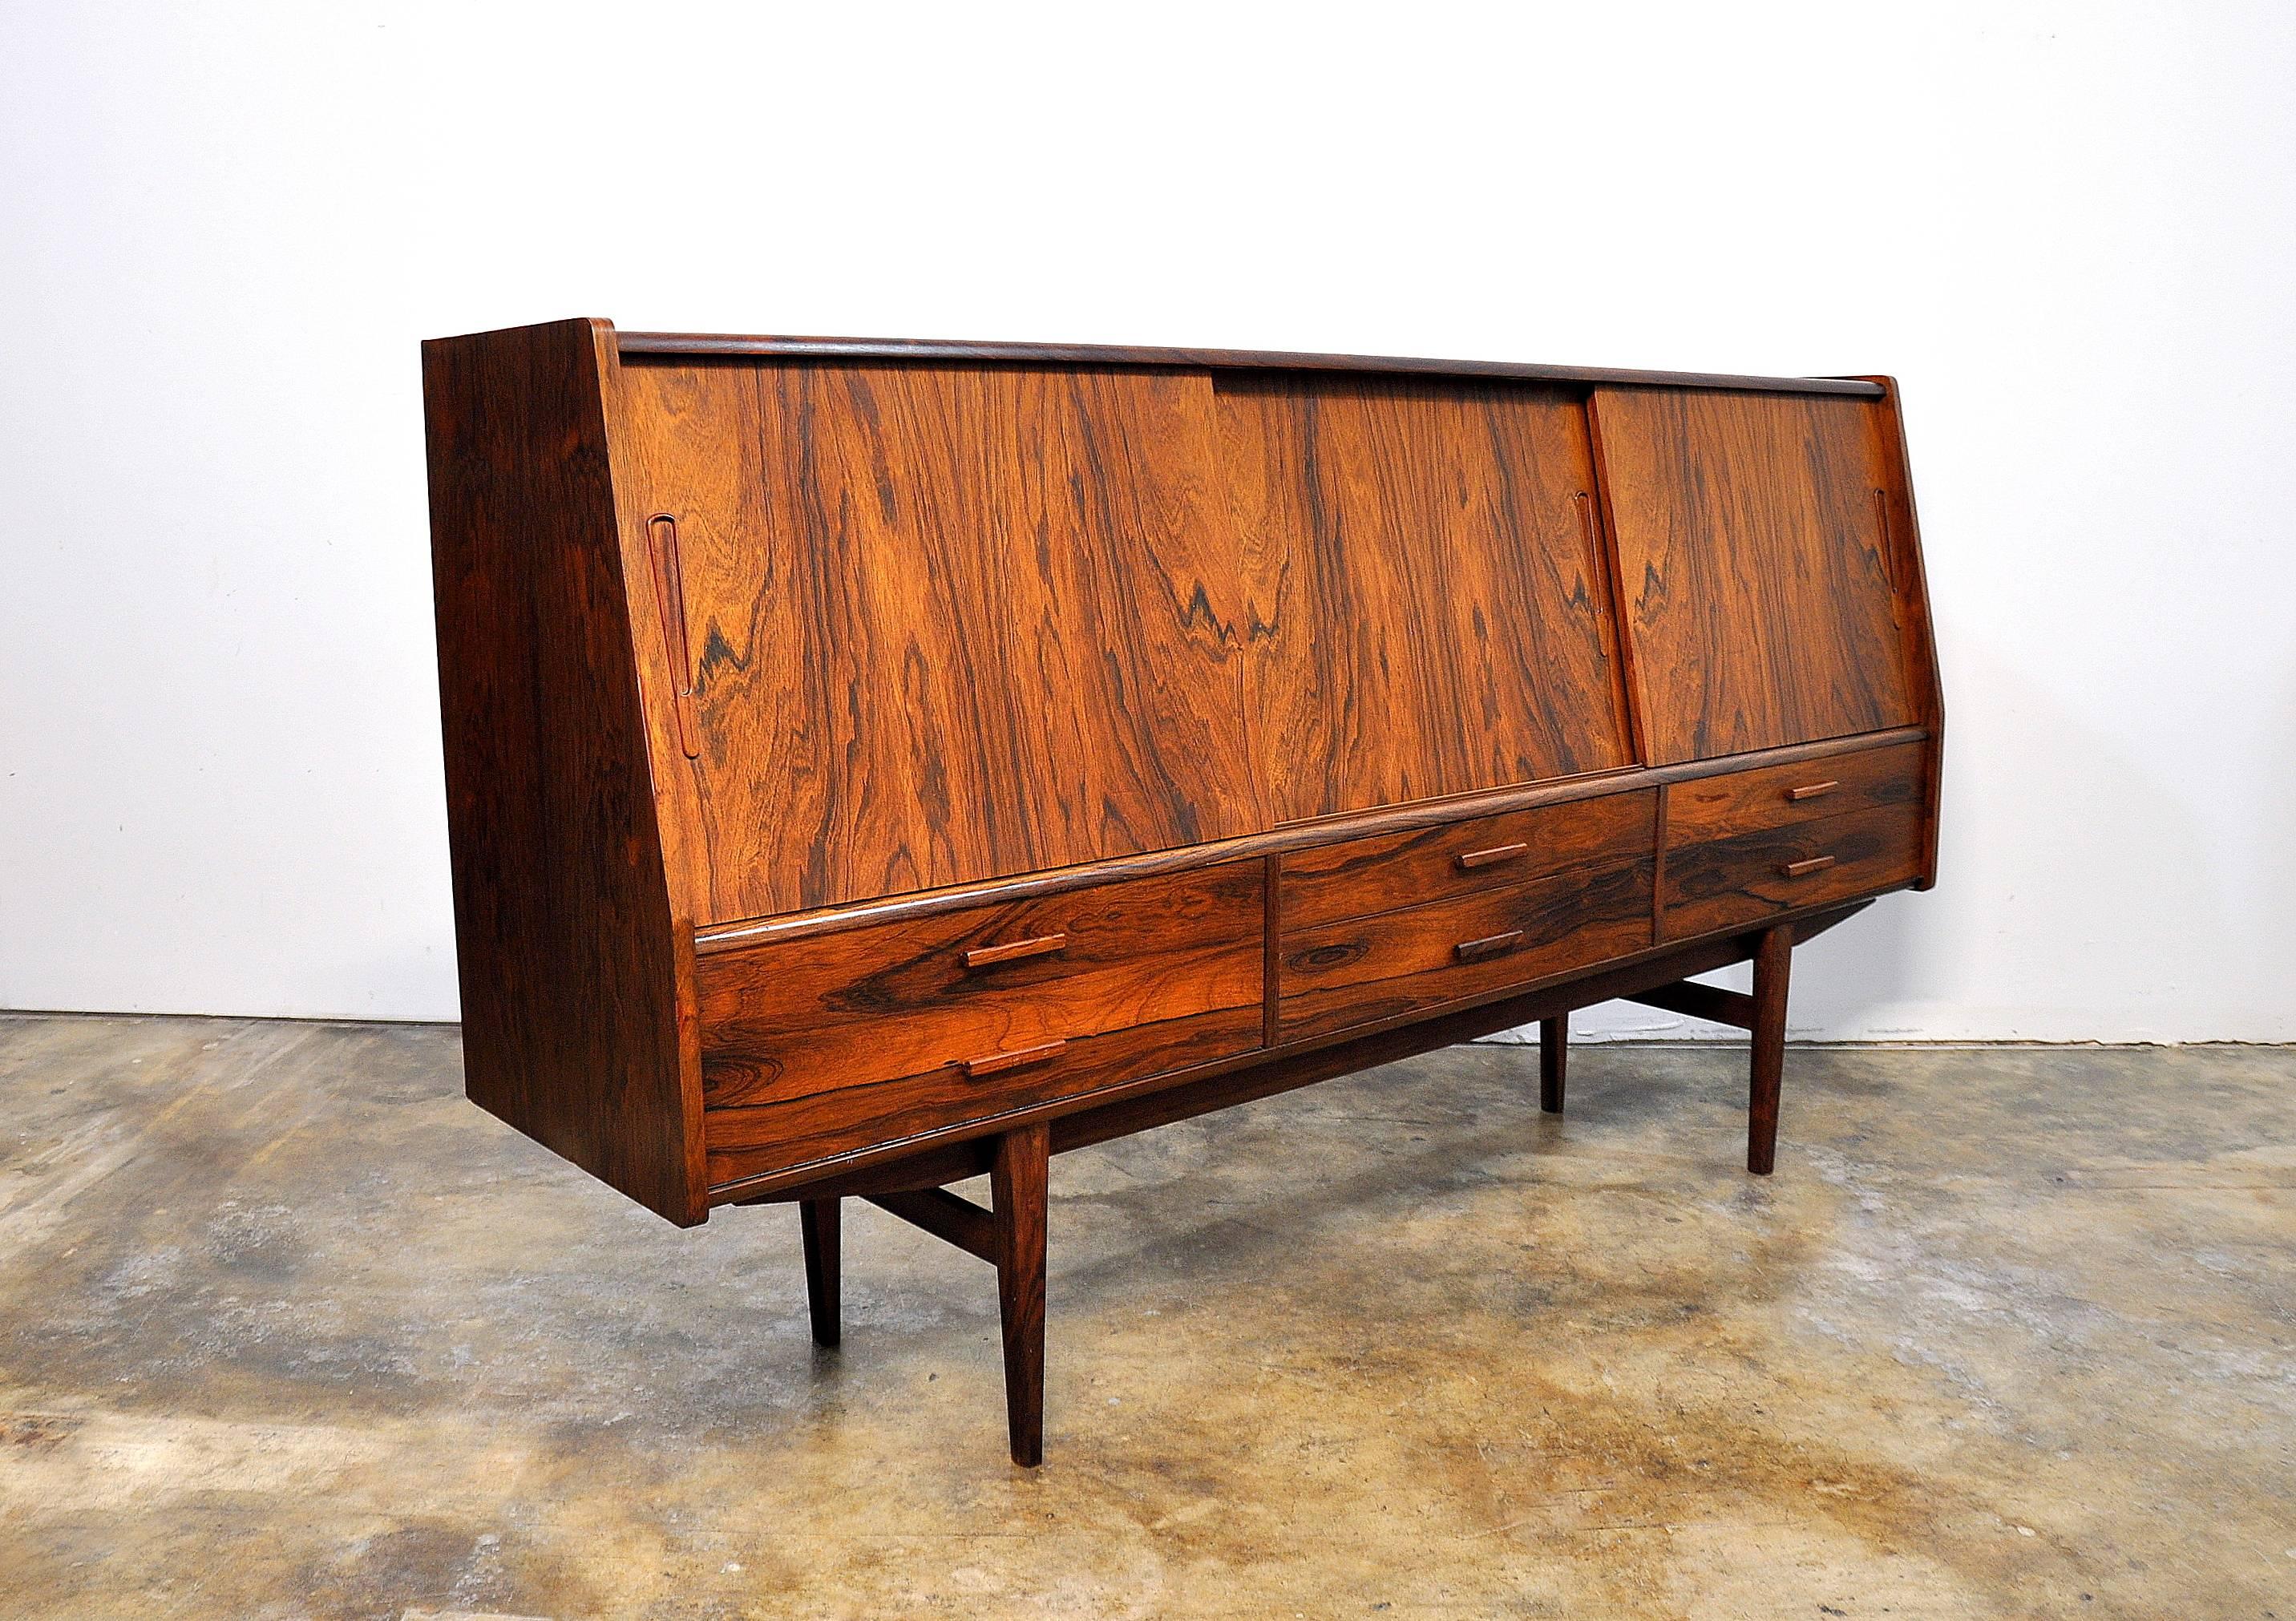 Superb example of a mid-century Danish modern highboard credenza or buffet in Brazilian rosewood featuring a central, mirrored dry bar section with a single shelf and two felt lined drawers, flanked by a pair of cabinet sections with three